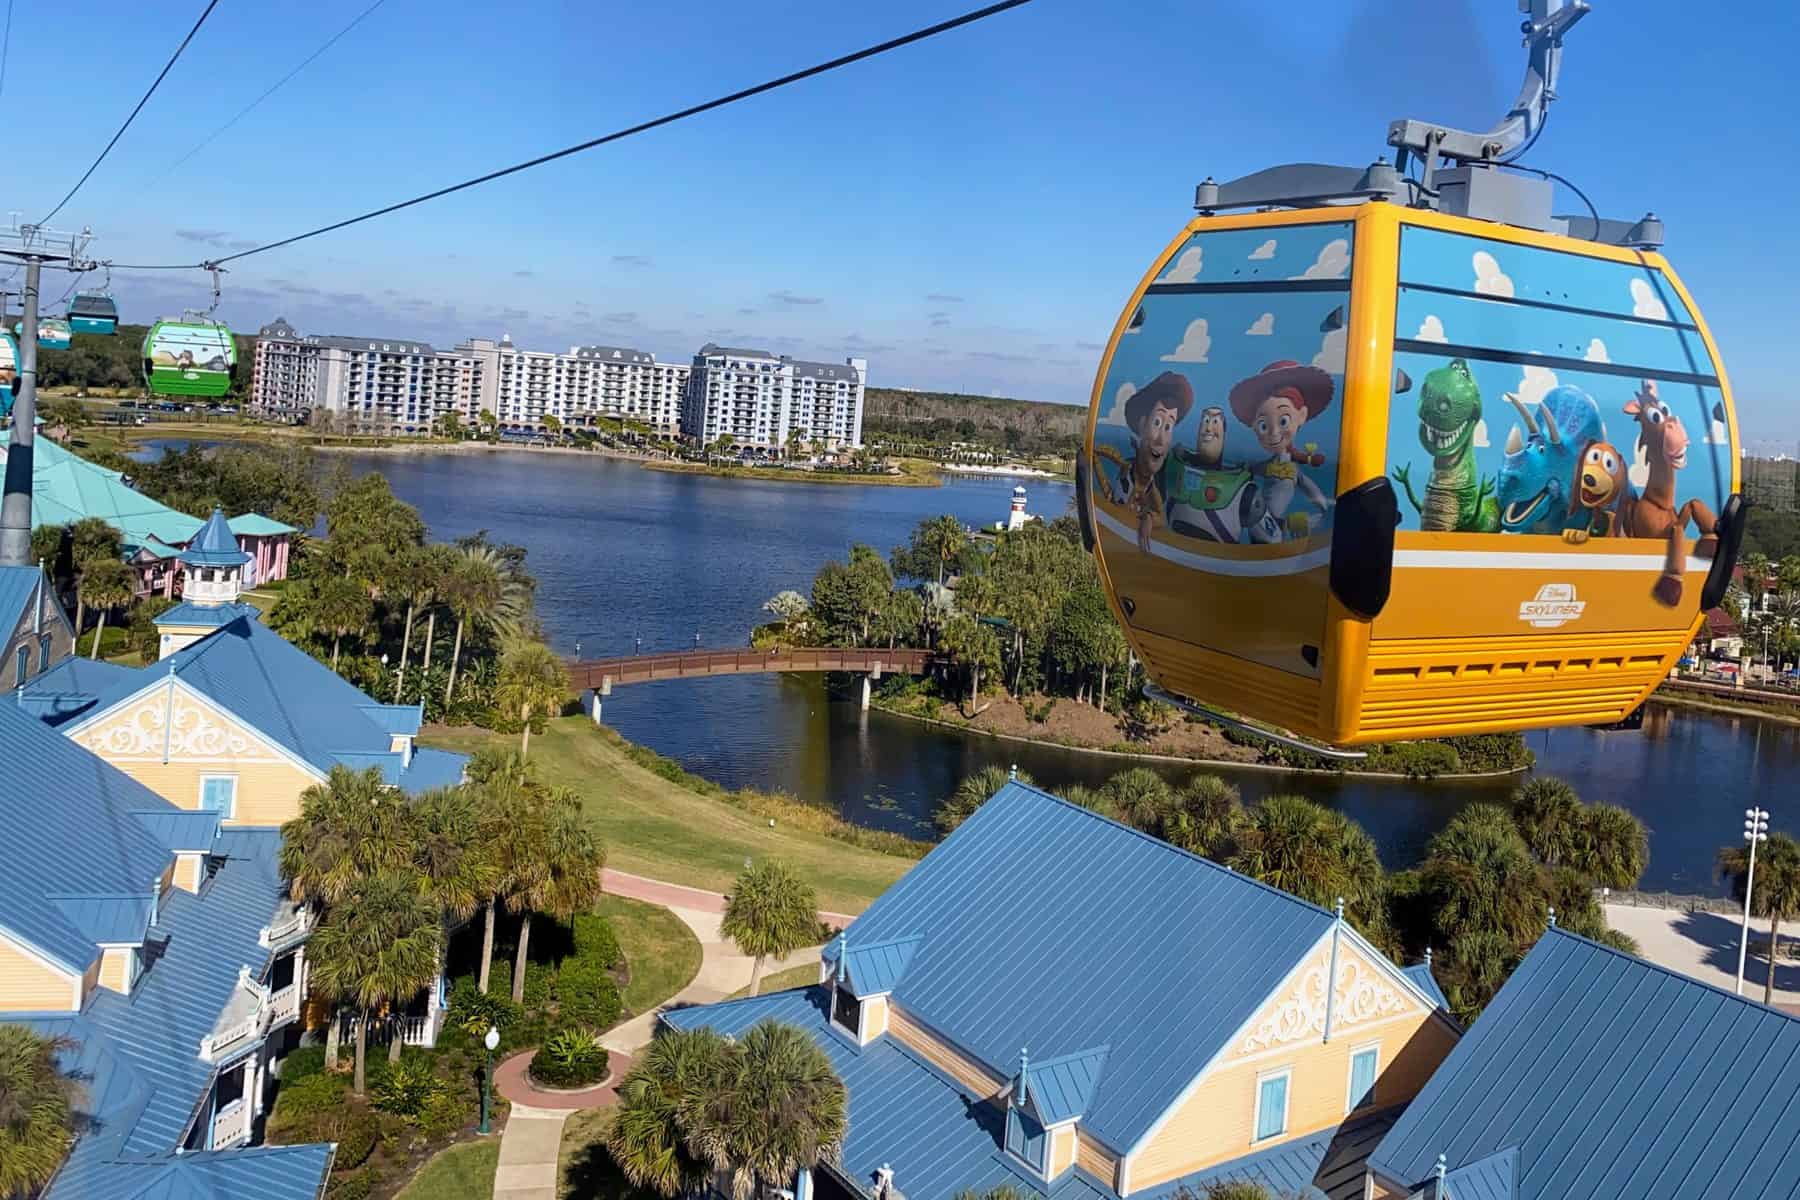 View of the Skyliner